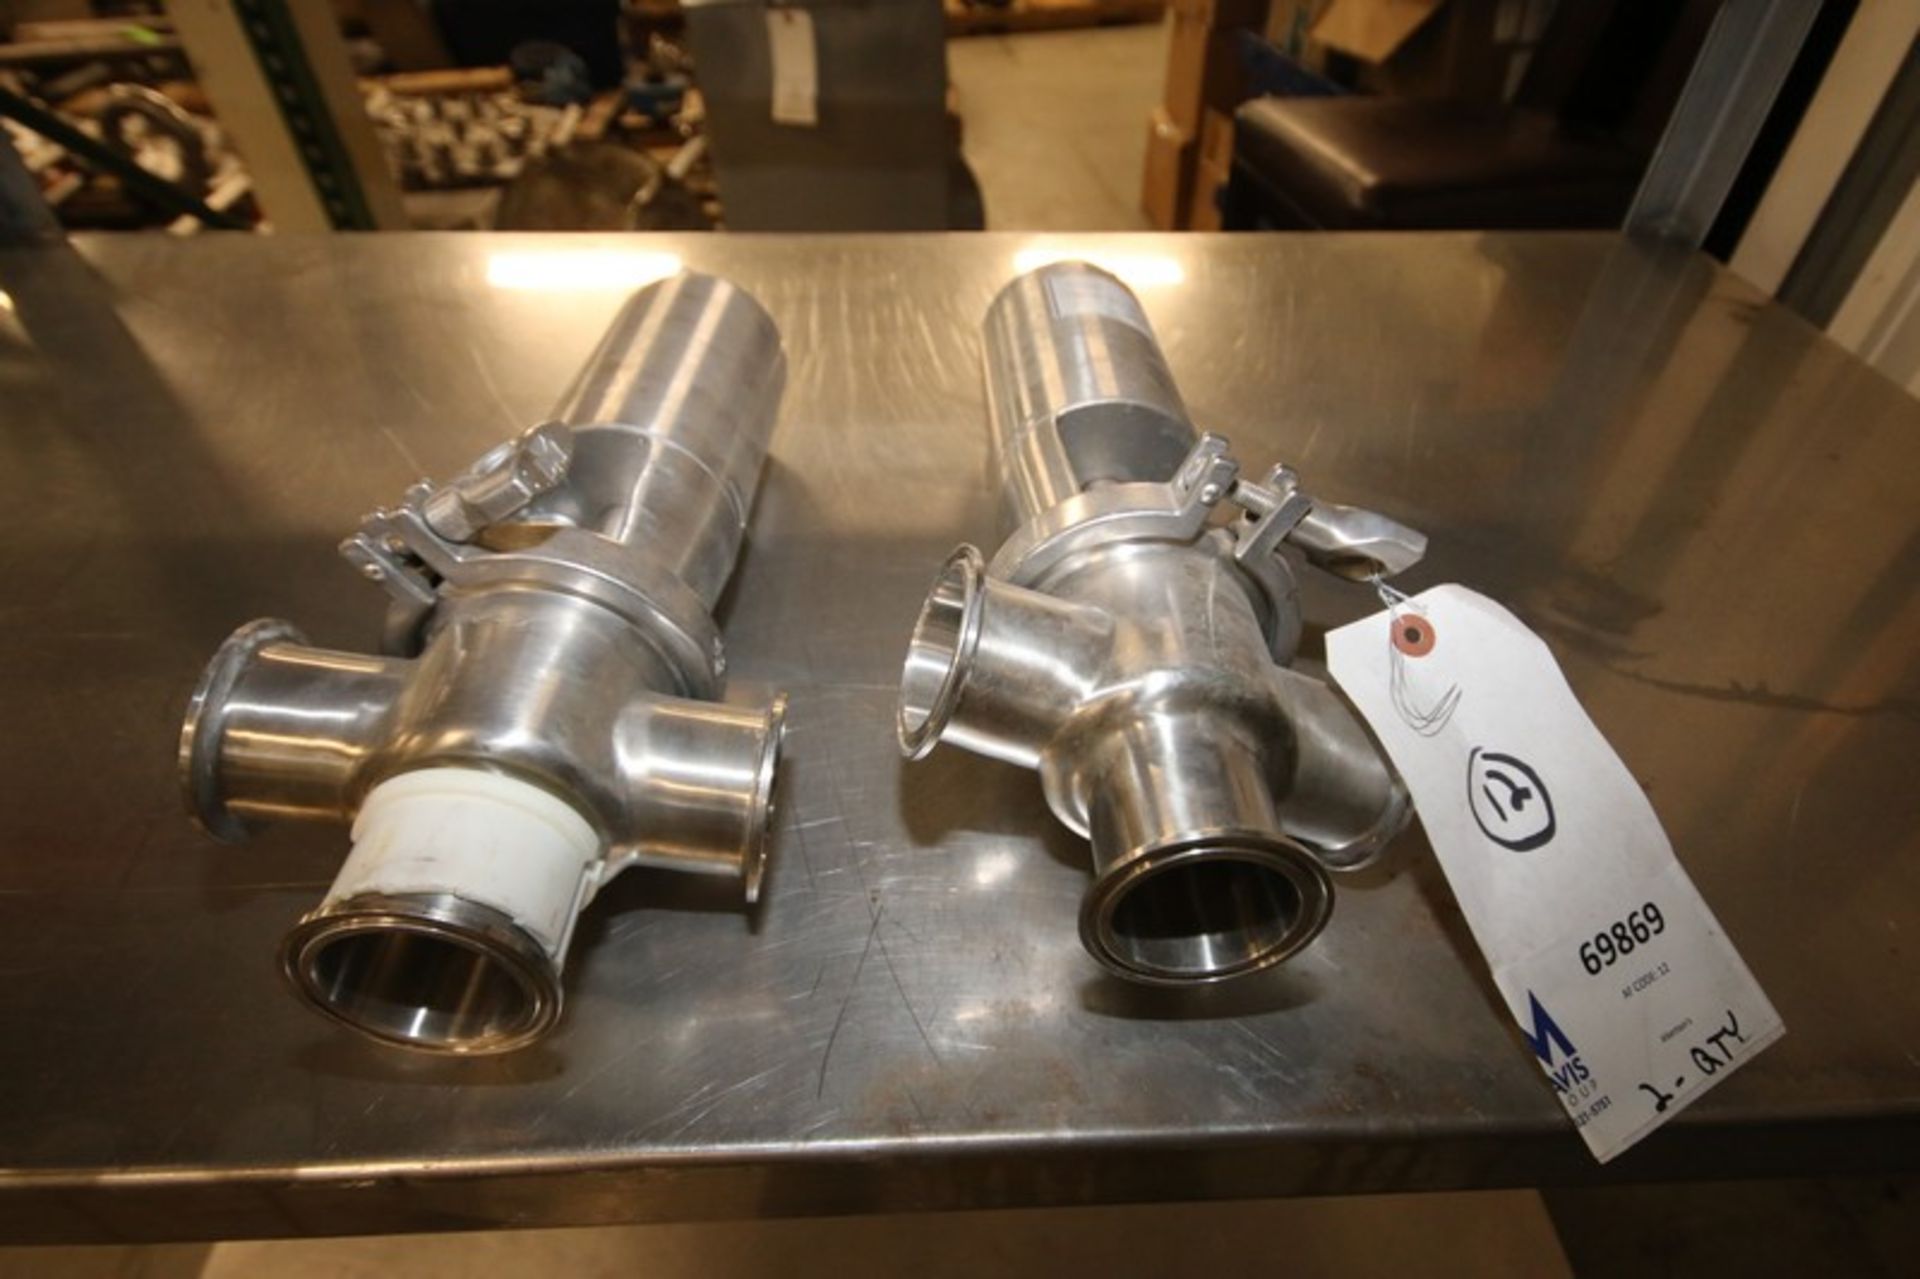 Lot of (2) Alfa Laval 2" 3-Way S/S Air Valve, Clamp Type (INV#69869)(LOCATED AT MDG AUCTION